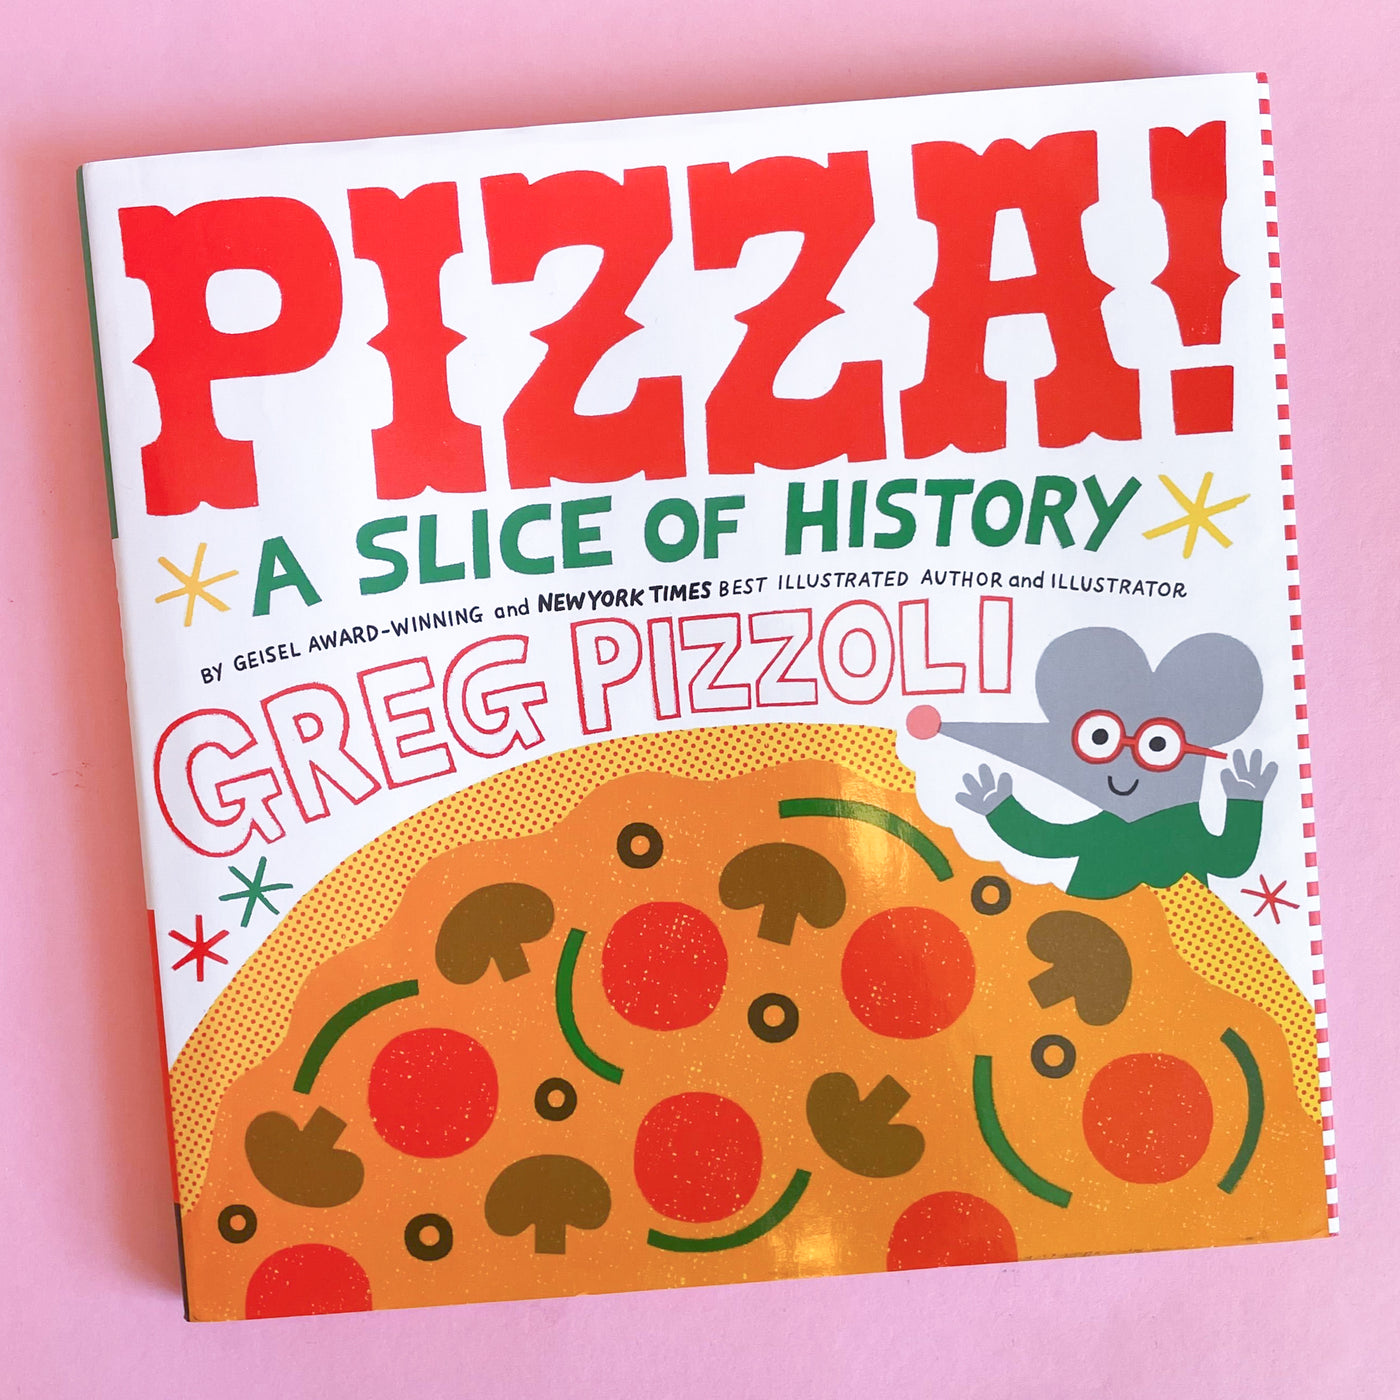 Pizza!: A Slice of History by Greg Pizzoli – Collage Collage